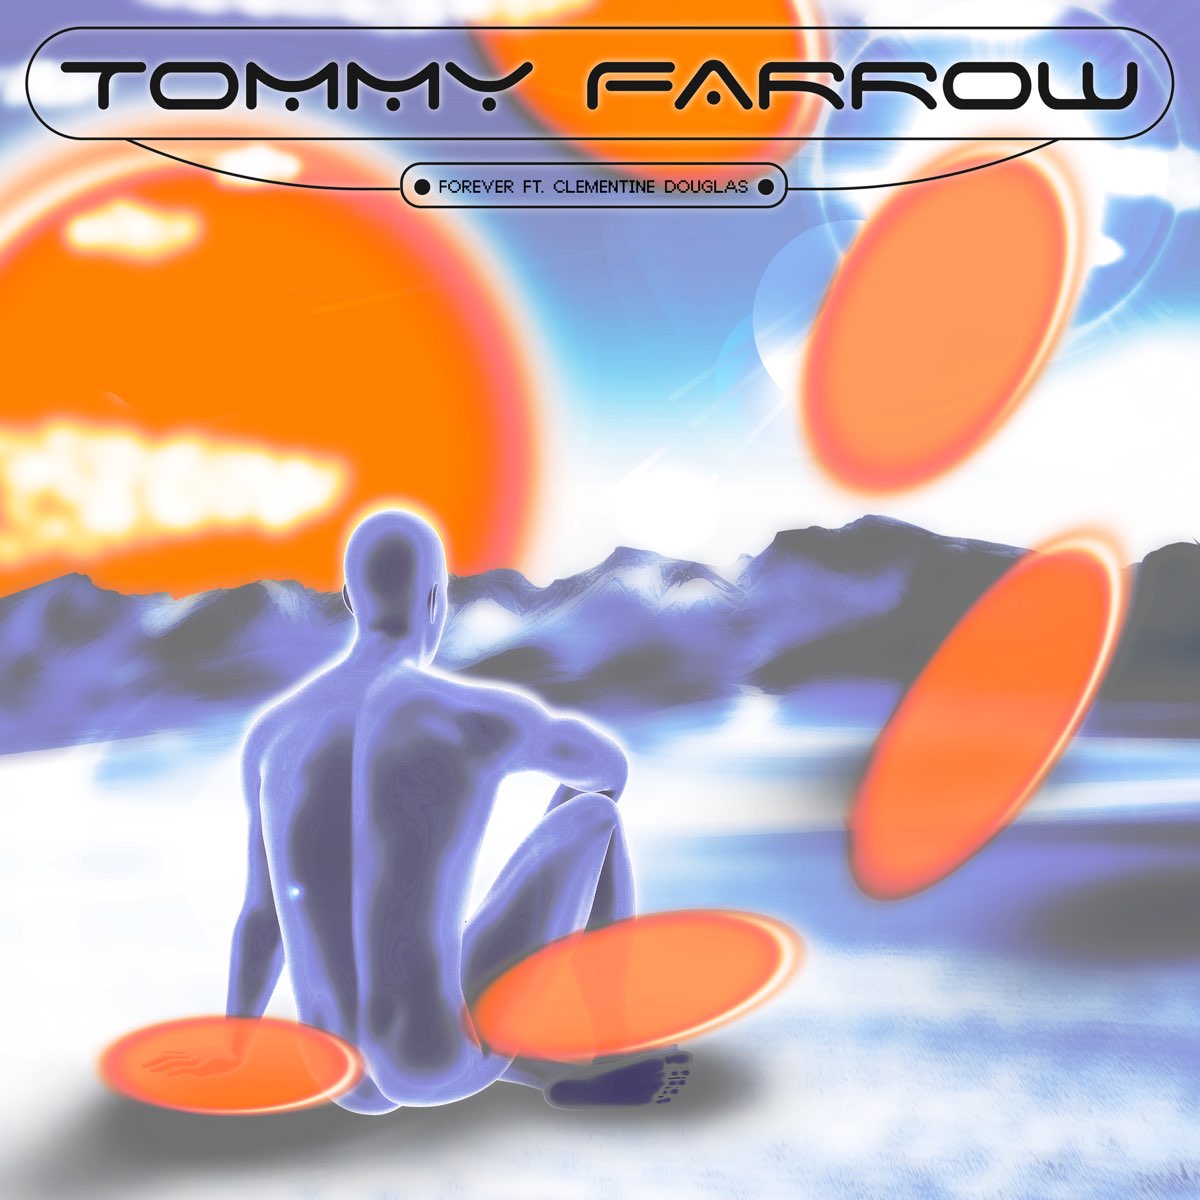 Tommy Farrow featuring Clementine Douglas — Forever cover artwork